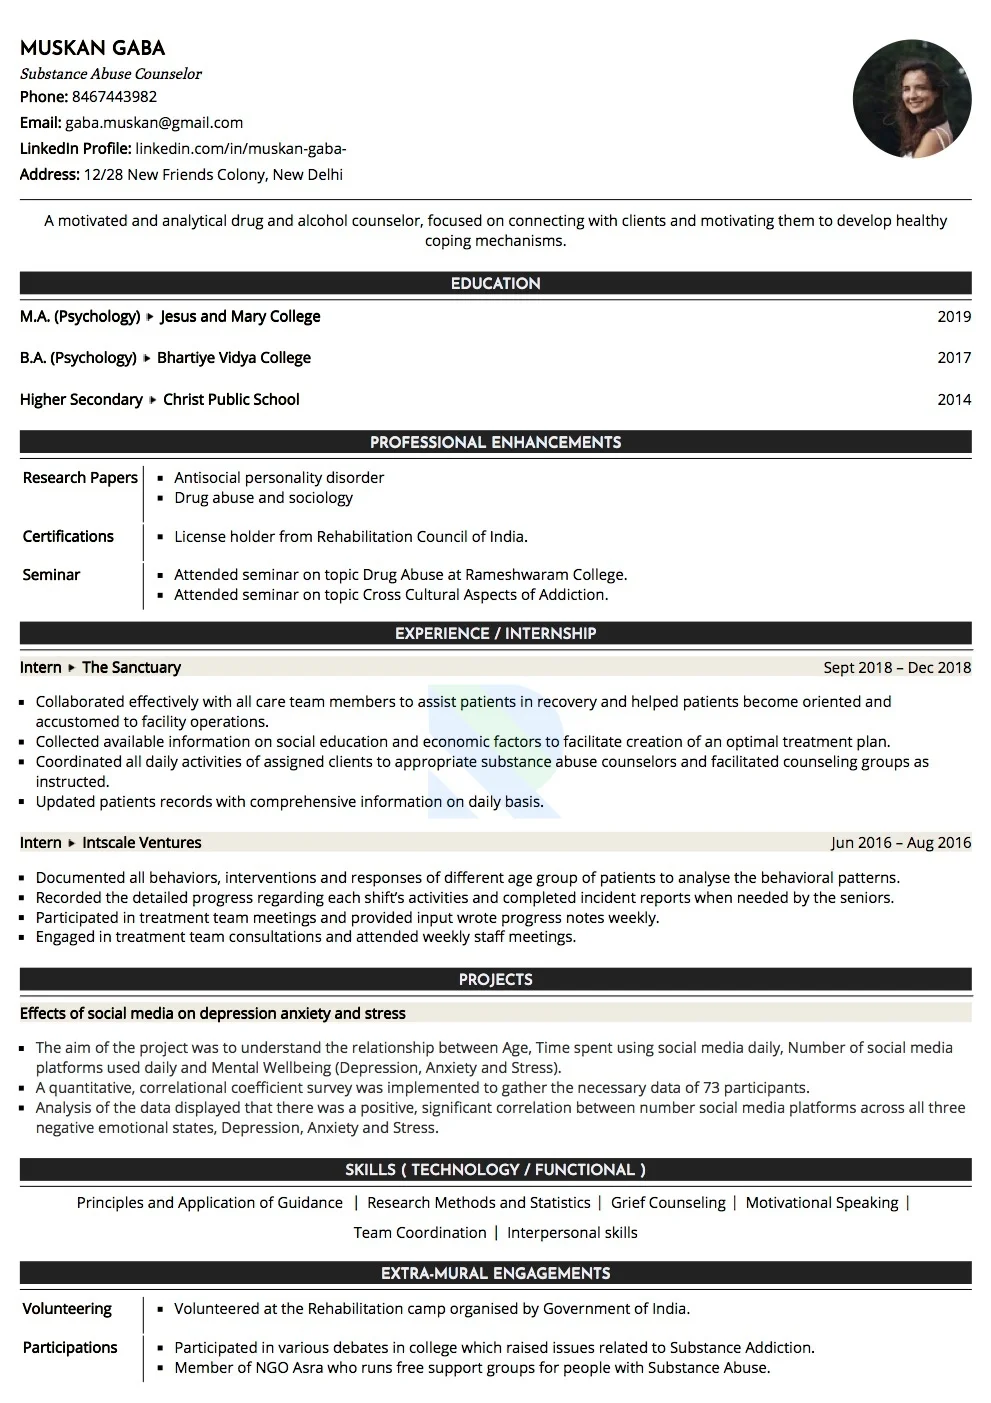 Sample Resume of Substance Abuse Counselor | Free Resume Templates & Samples on Resumod.co